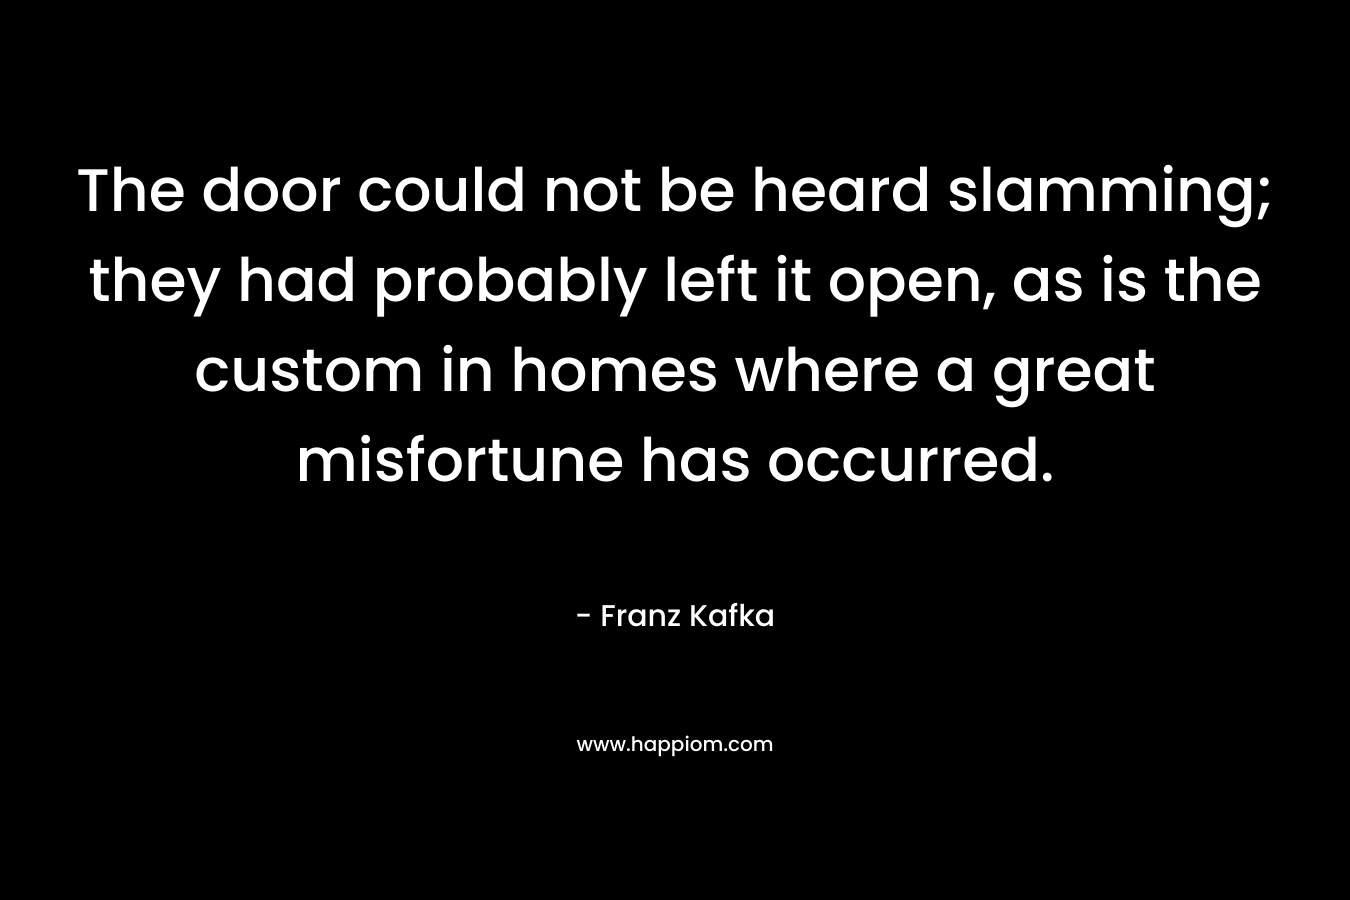 The door could not be heard slamming; they had probably left it open, as is the custom in homes where a great misfortune has occurred. – Franz Kafka